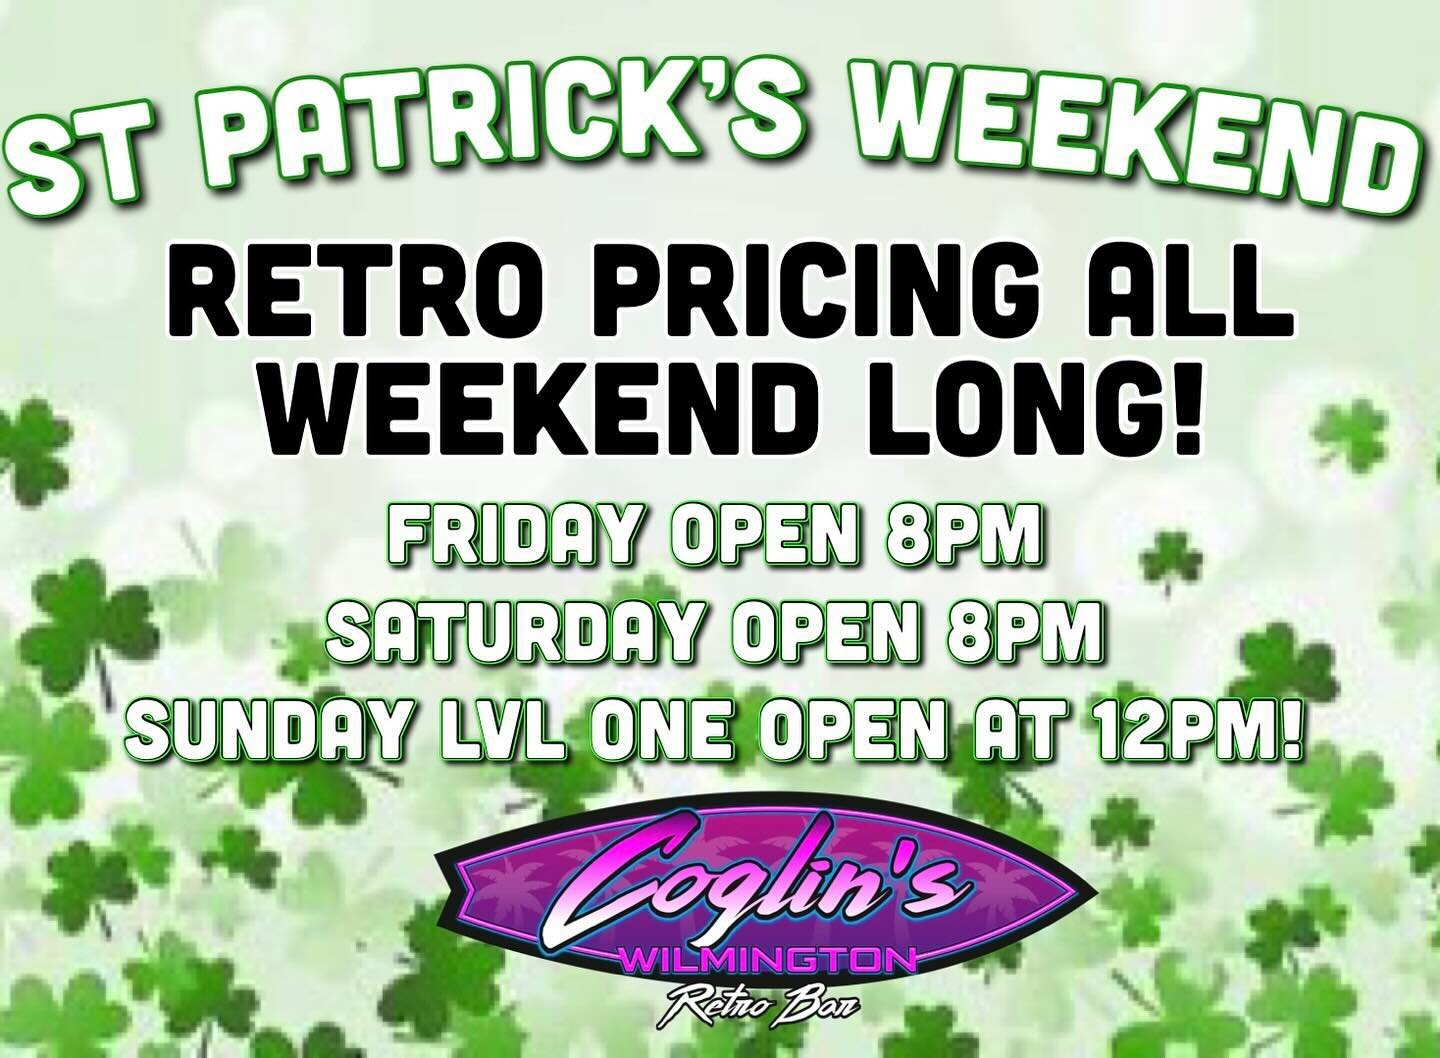 Coglin&rsquo;s is throwing the ultimate party this St. Patrick&rsquo;s day weekend- and it&rsquo;s happening three days in a row!

Come on out for $4 wells, $4 domestics and $5 select premium liquor all weekend long!